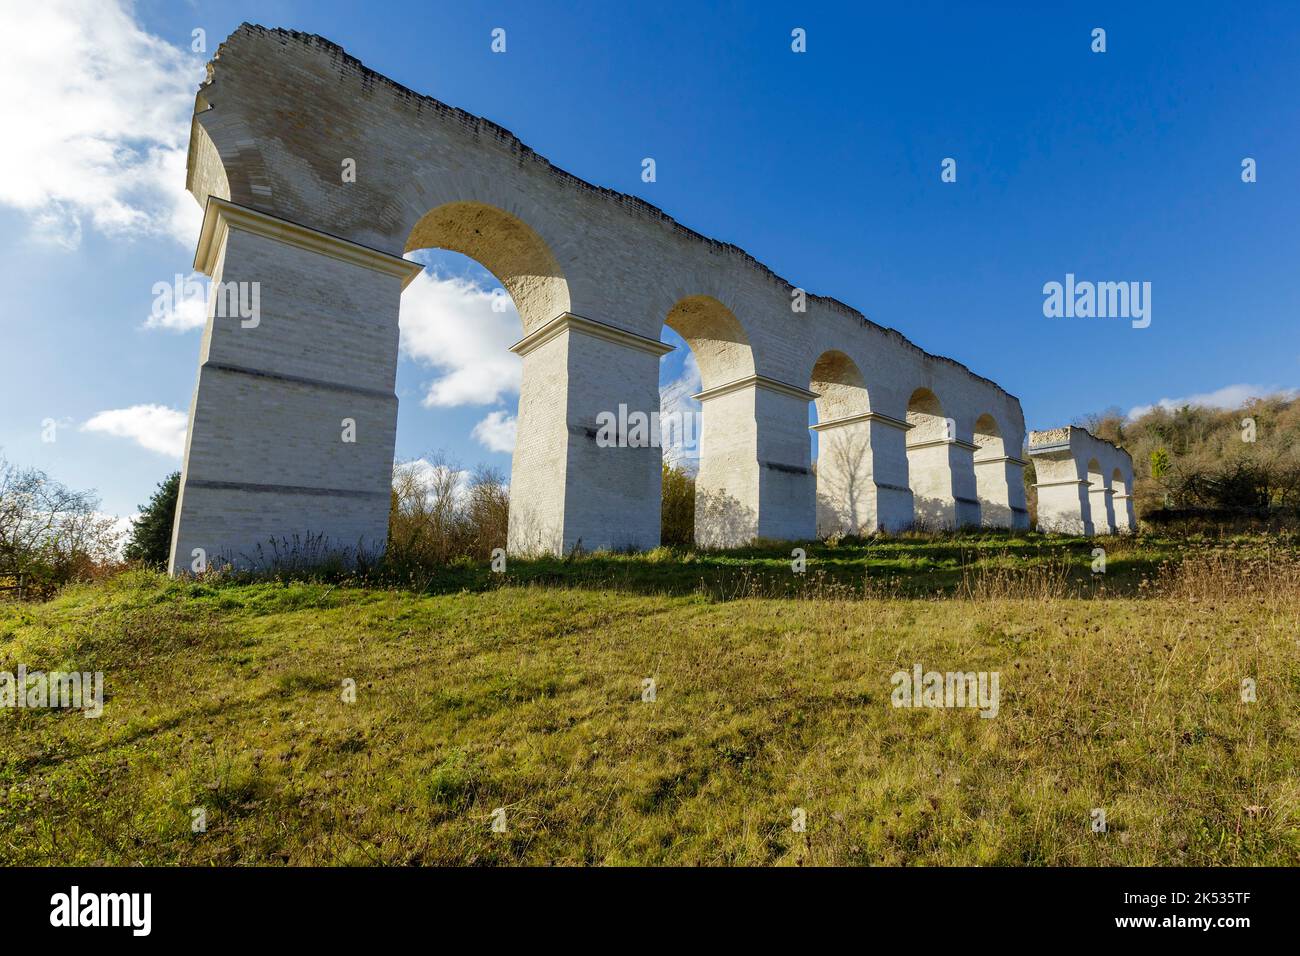 France, Moselle, Ars sur Moselle, 2nd century Gorze Roman aquaduct which crossed the Moselle river between Ars sur Moselle and Jouy aux Arches to brin Stock Photo